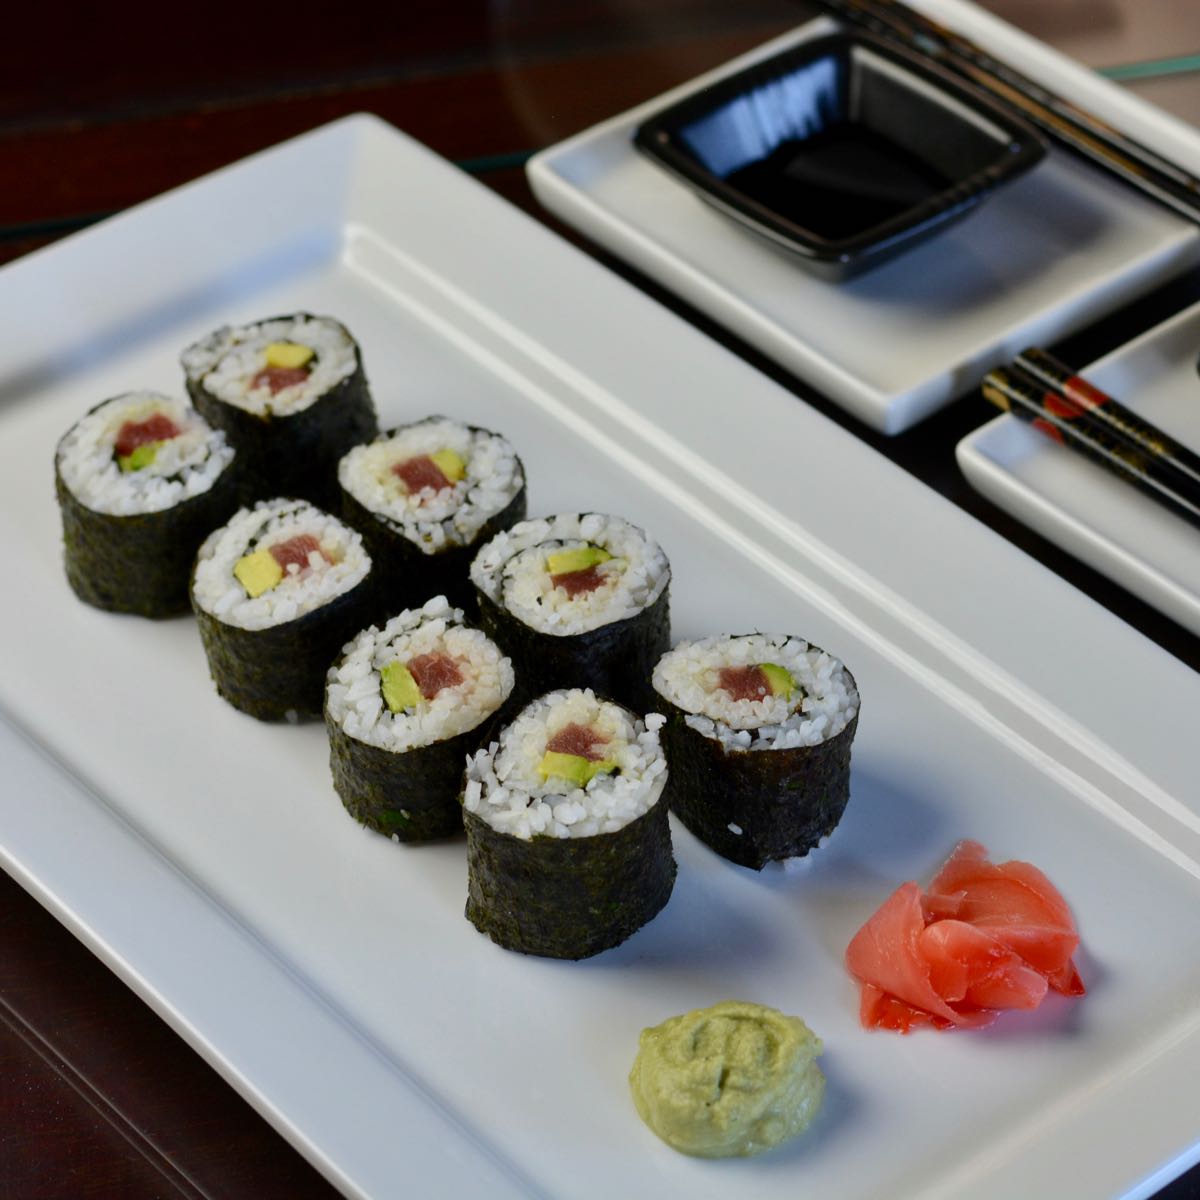 A plate with futomaki, homemade sushi rolls, with pickled ginger and wasabi.